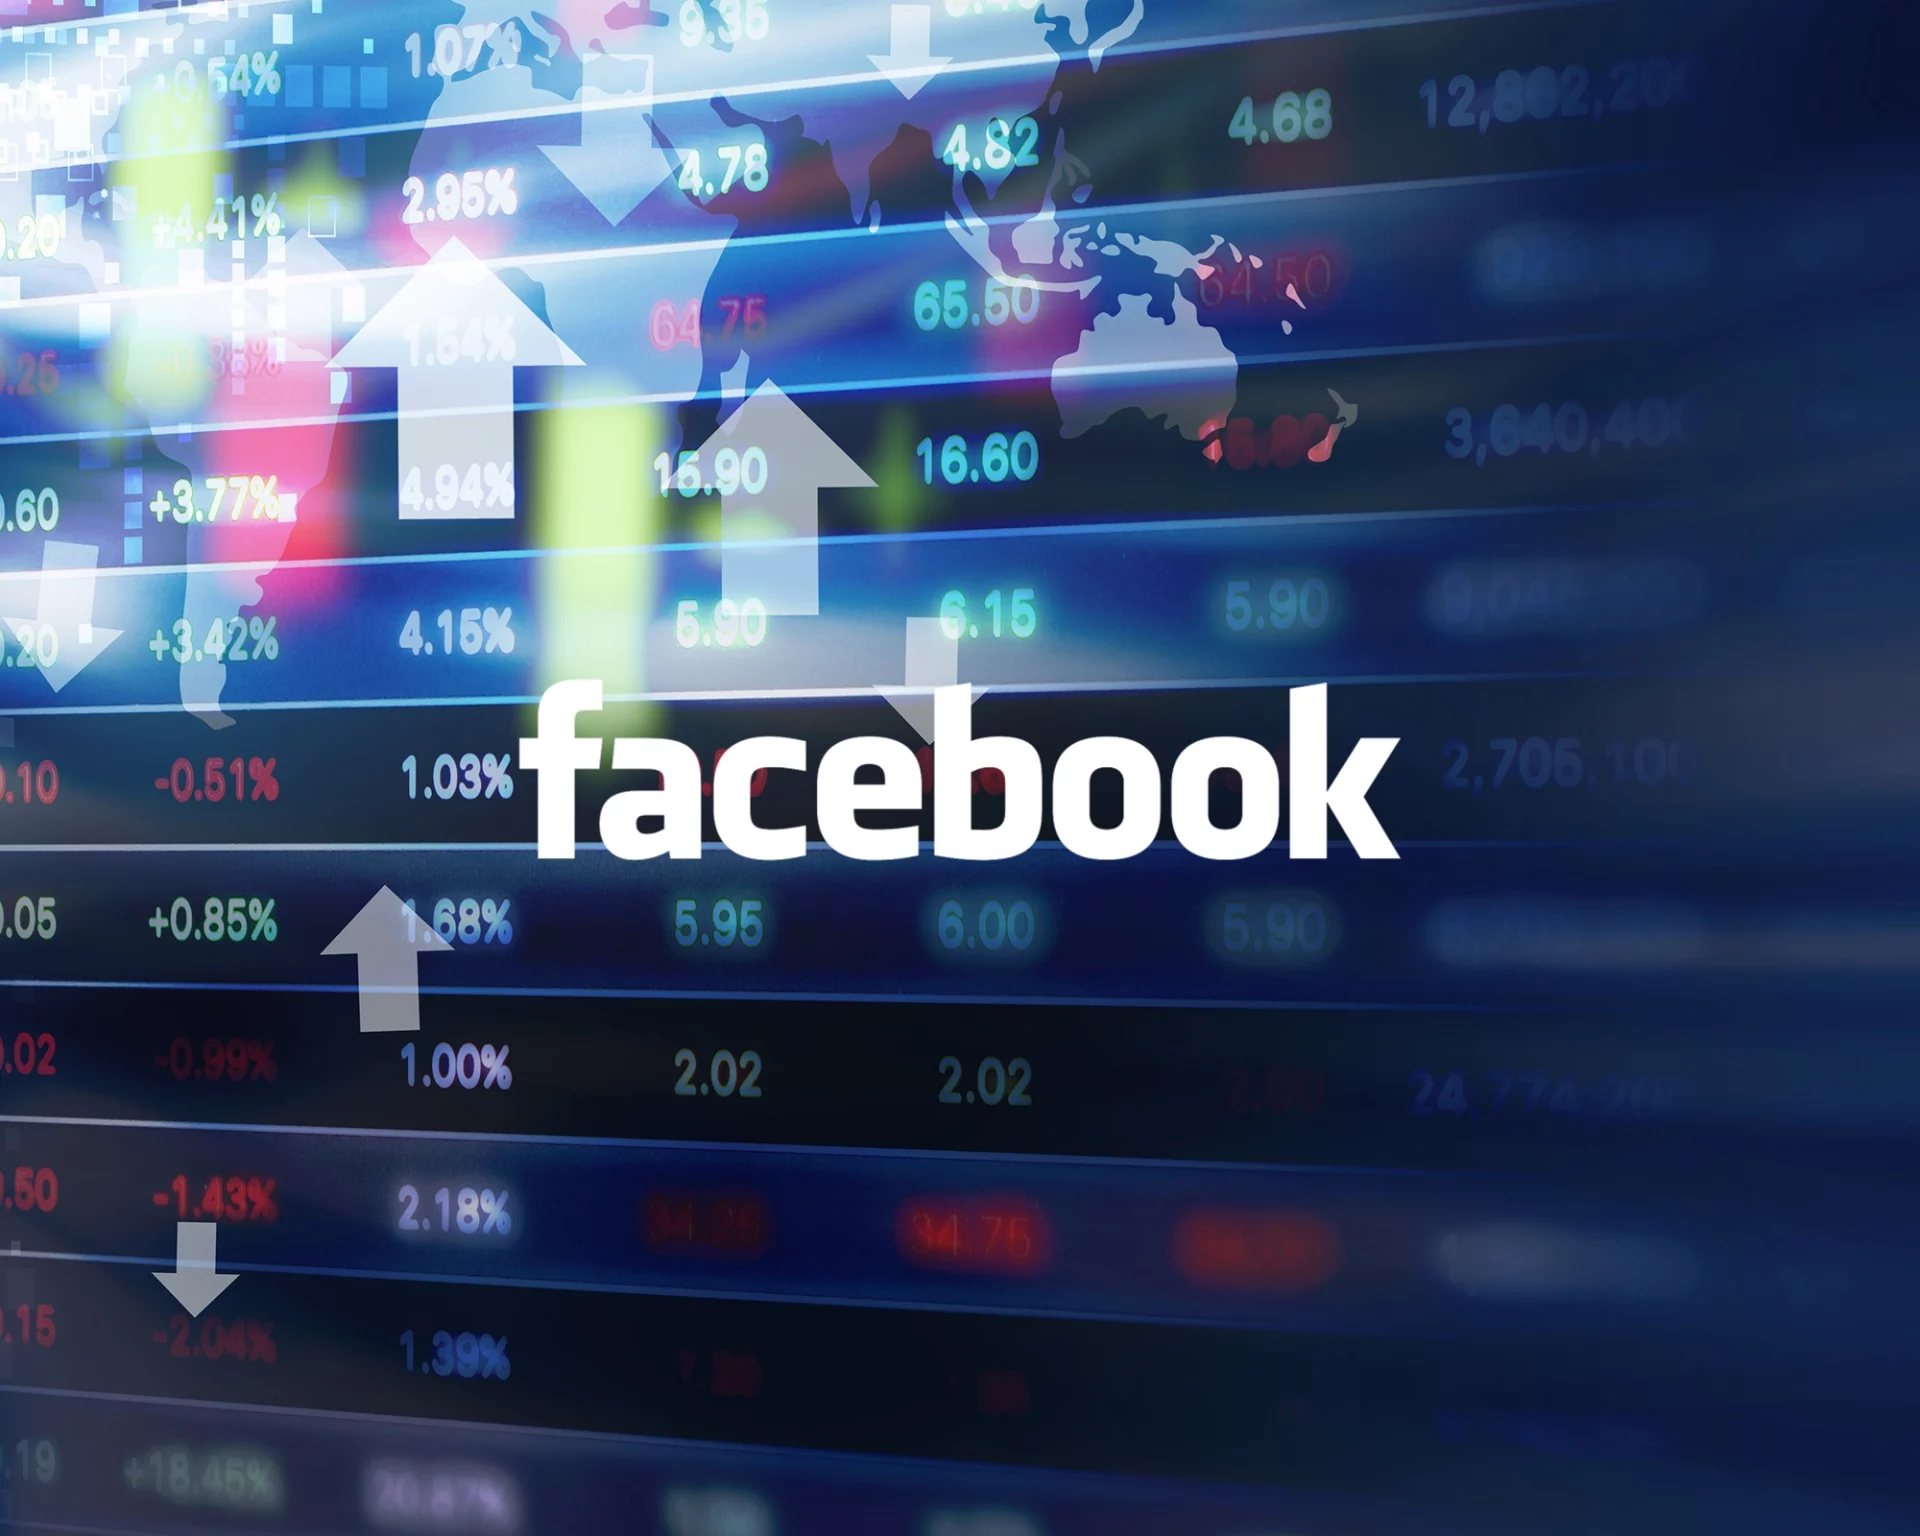 HOW TO BUY FACEBOOK SHARES